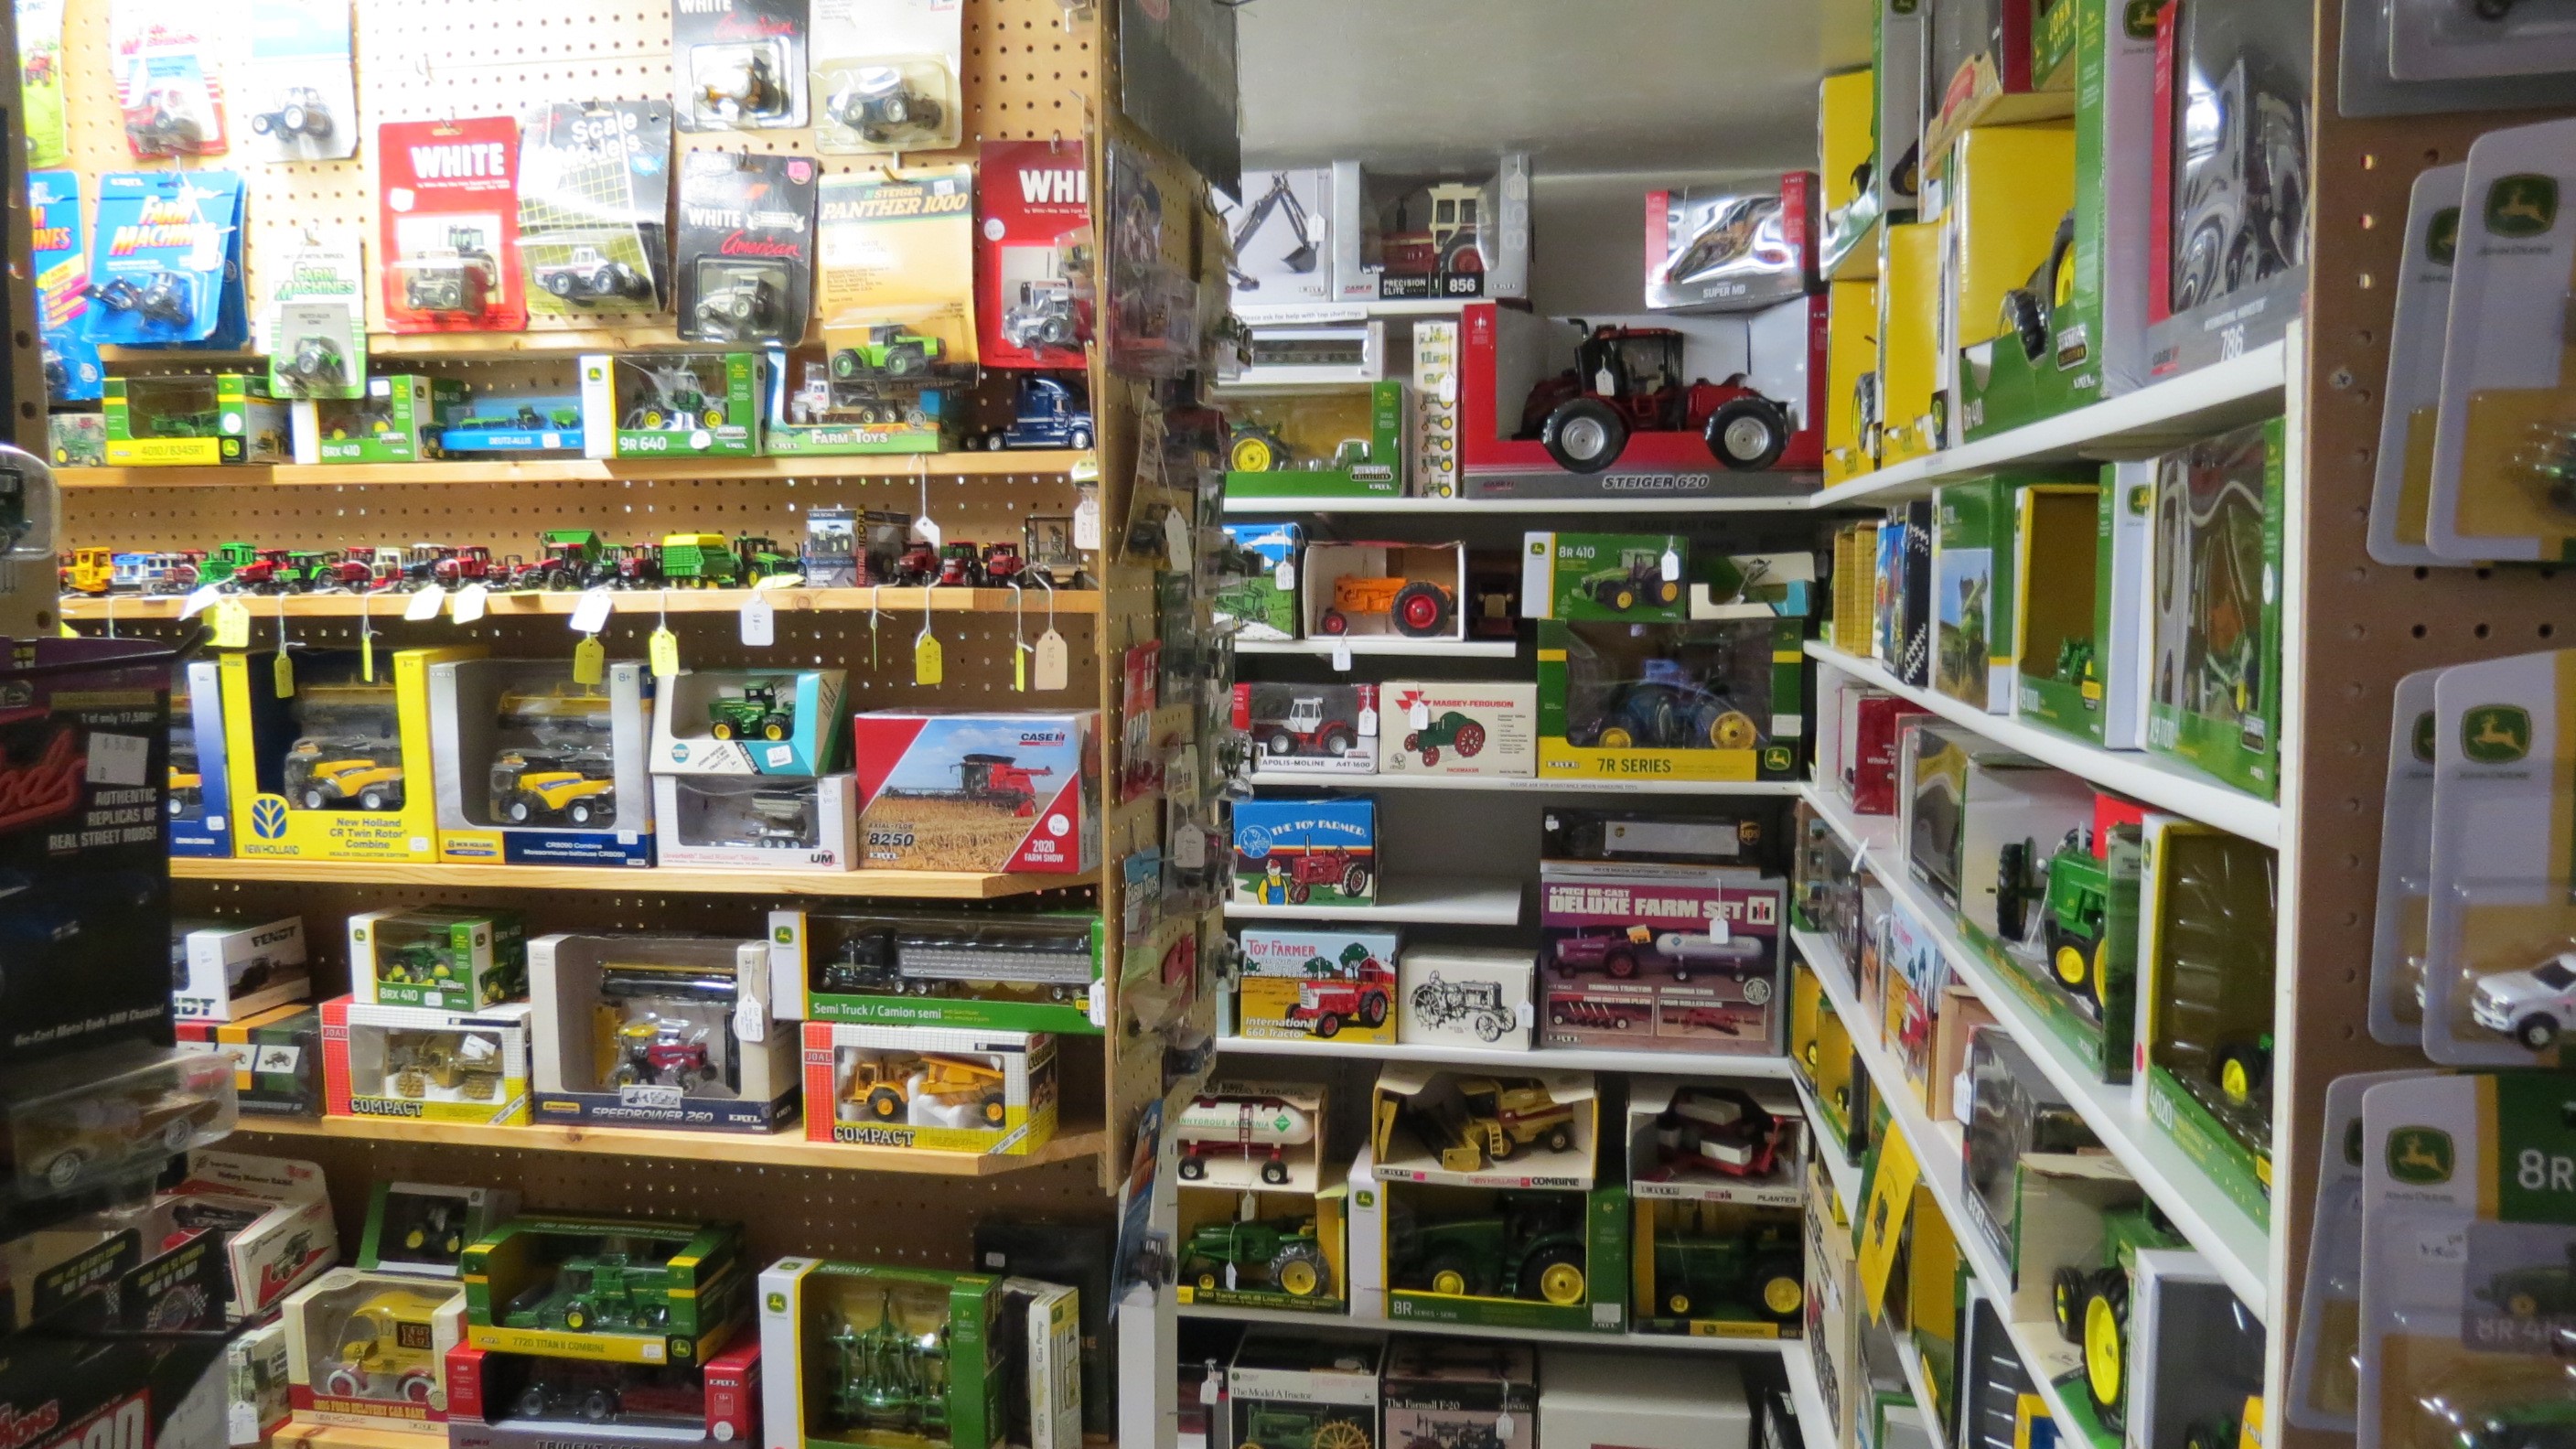 TOY ROOM - full of Tractors, Trucks and Cars